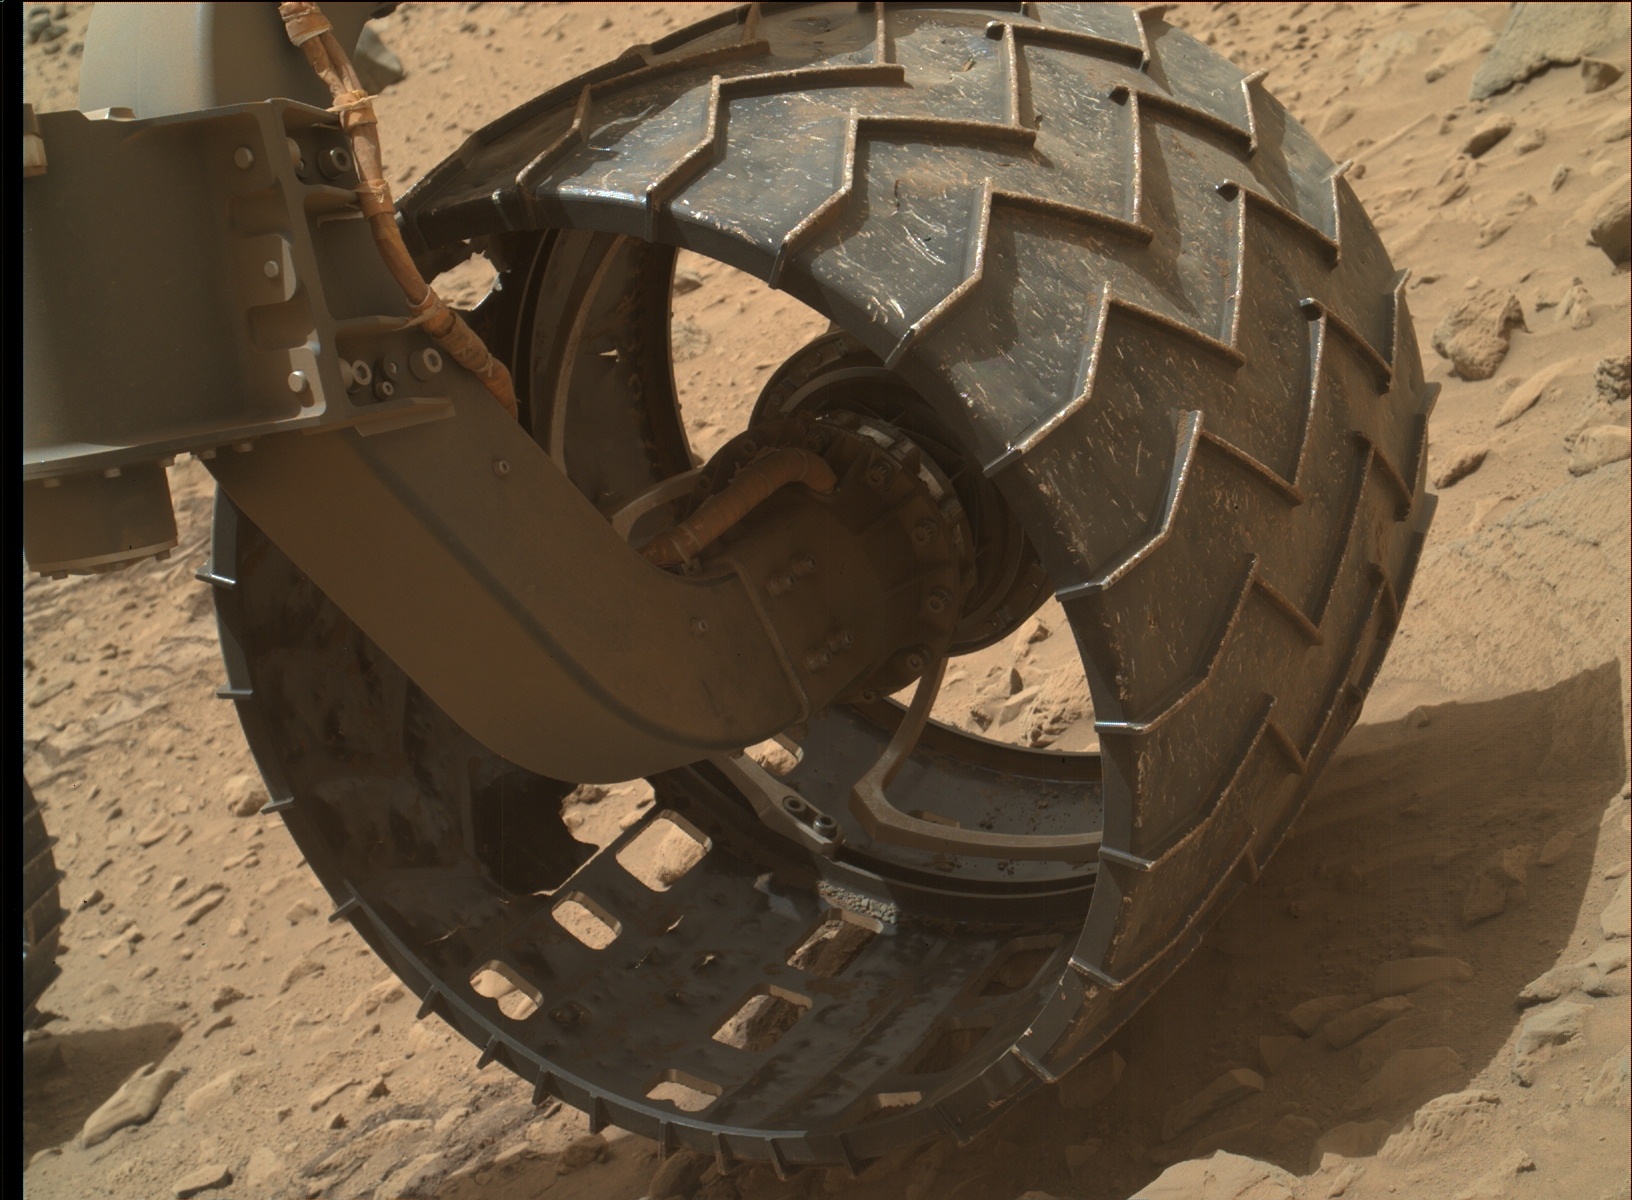 Nasa's Mars rover Curiosity acquired this image using its Mars Hand Lens Imager (MAHLI) on Sol 706